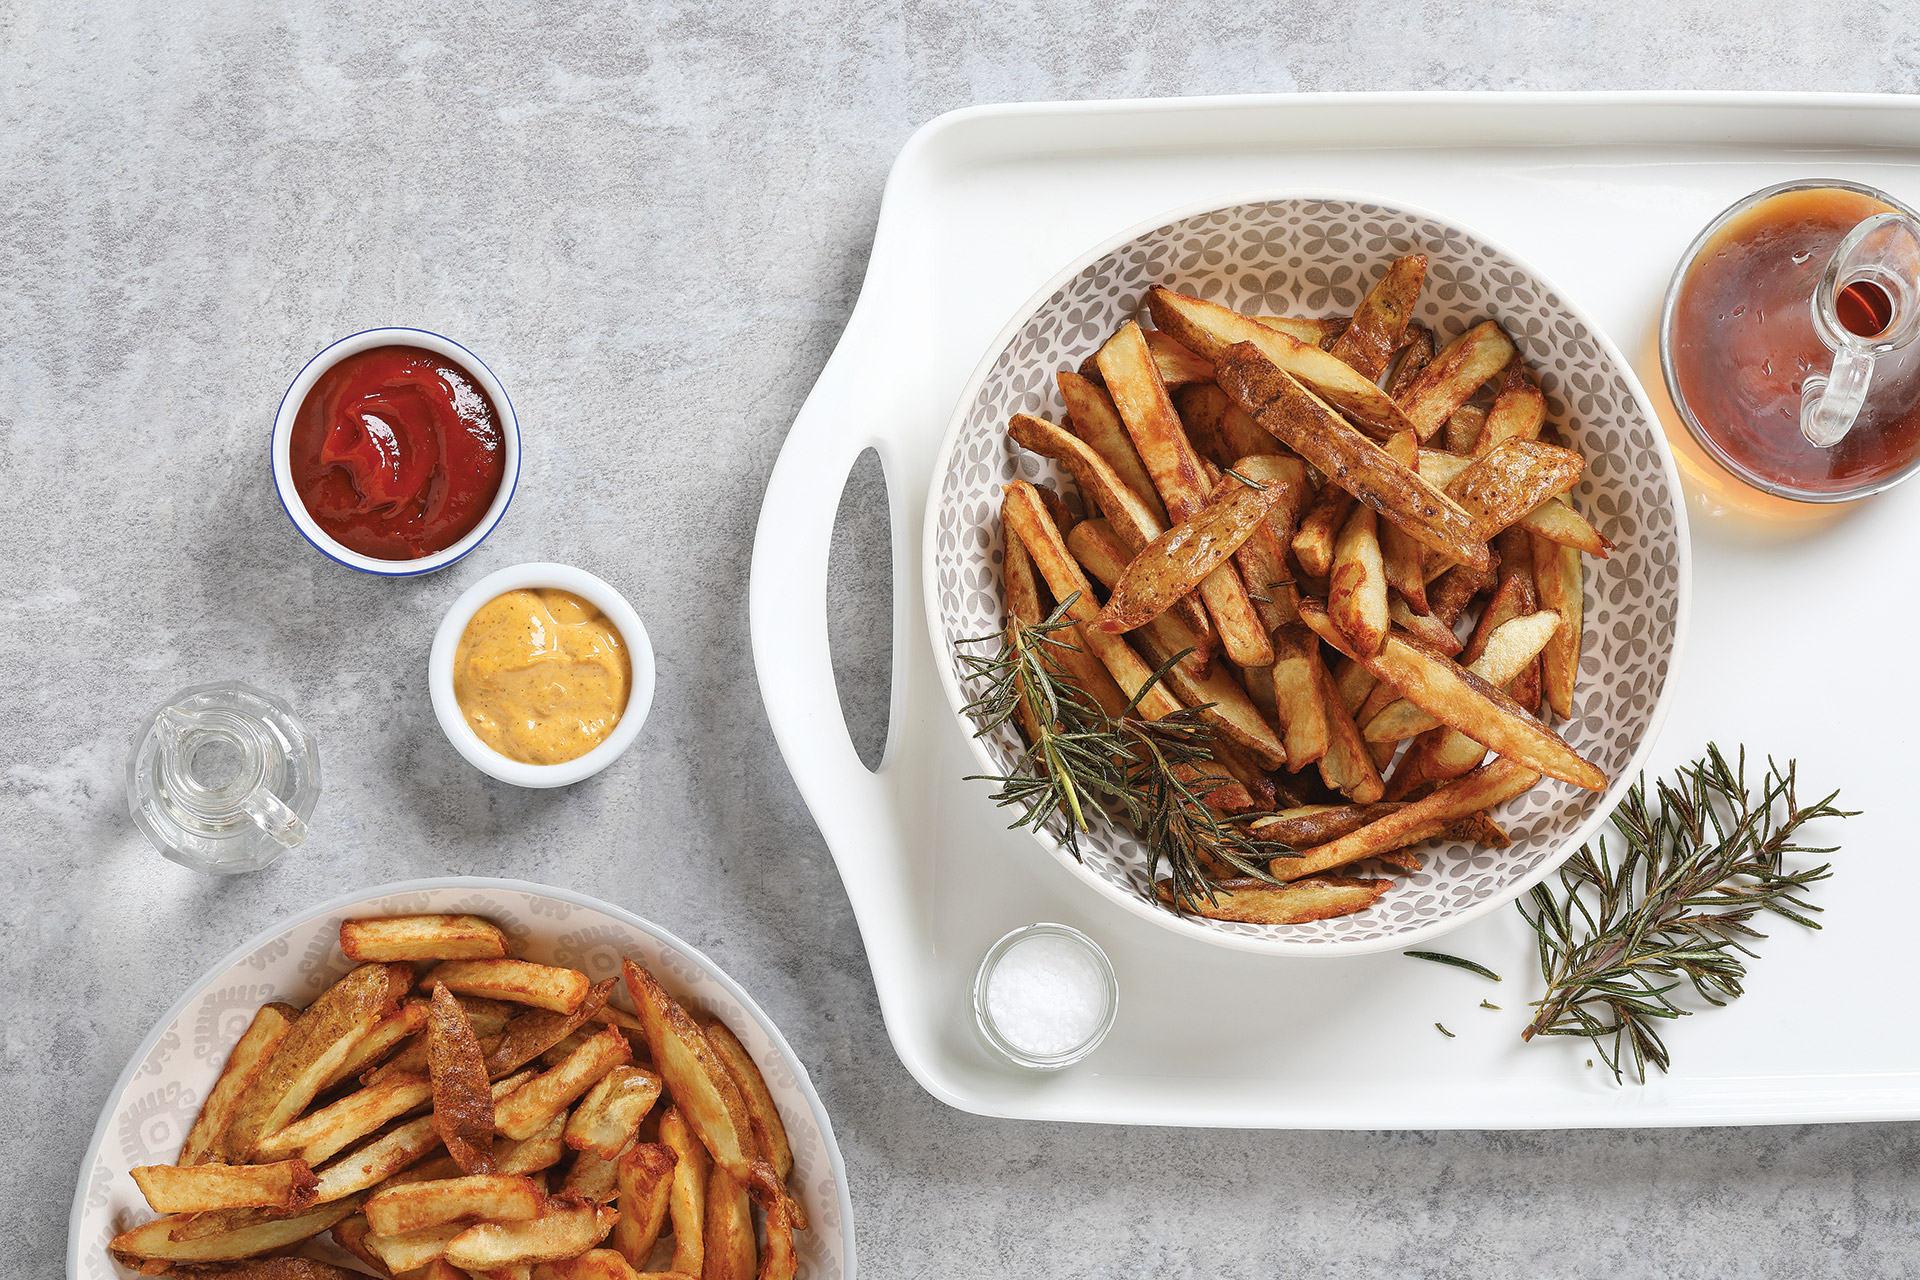 Classic Canola Oil French Fries